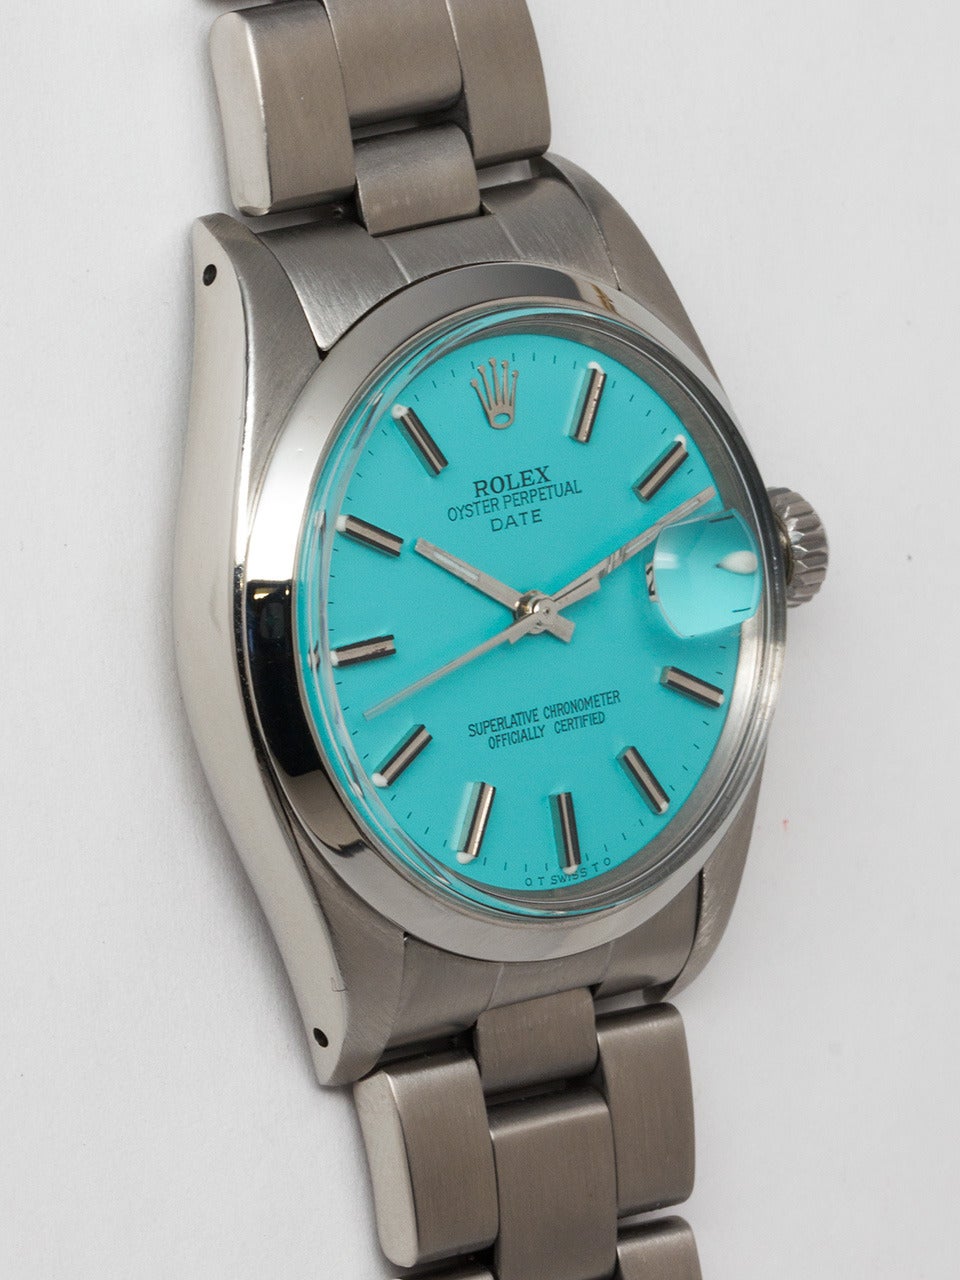 Rolex Stainless Steel Oyster Perpetual Date Wristwatch ref 1500 serial # 3.9 million circa 1975. 34mm diameter case with smooth bezel and acrylic crystal. Beautiful custom colored Tiffany Blue dial with applied silver indexes and silver baton hands.